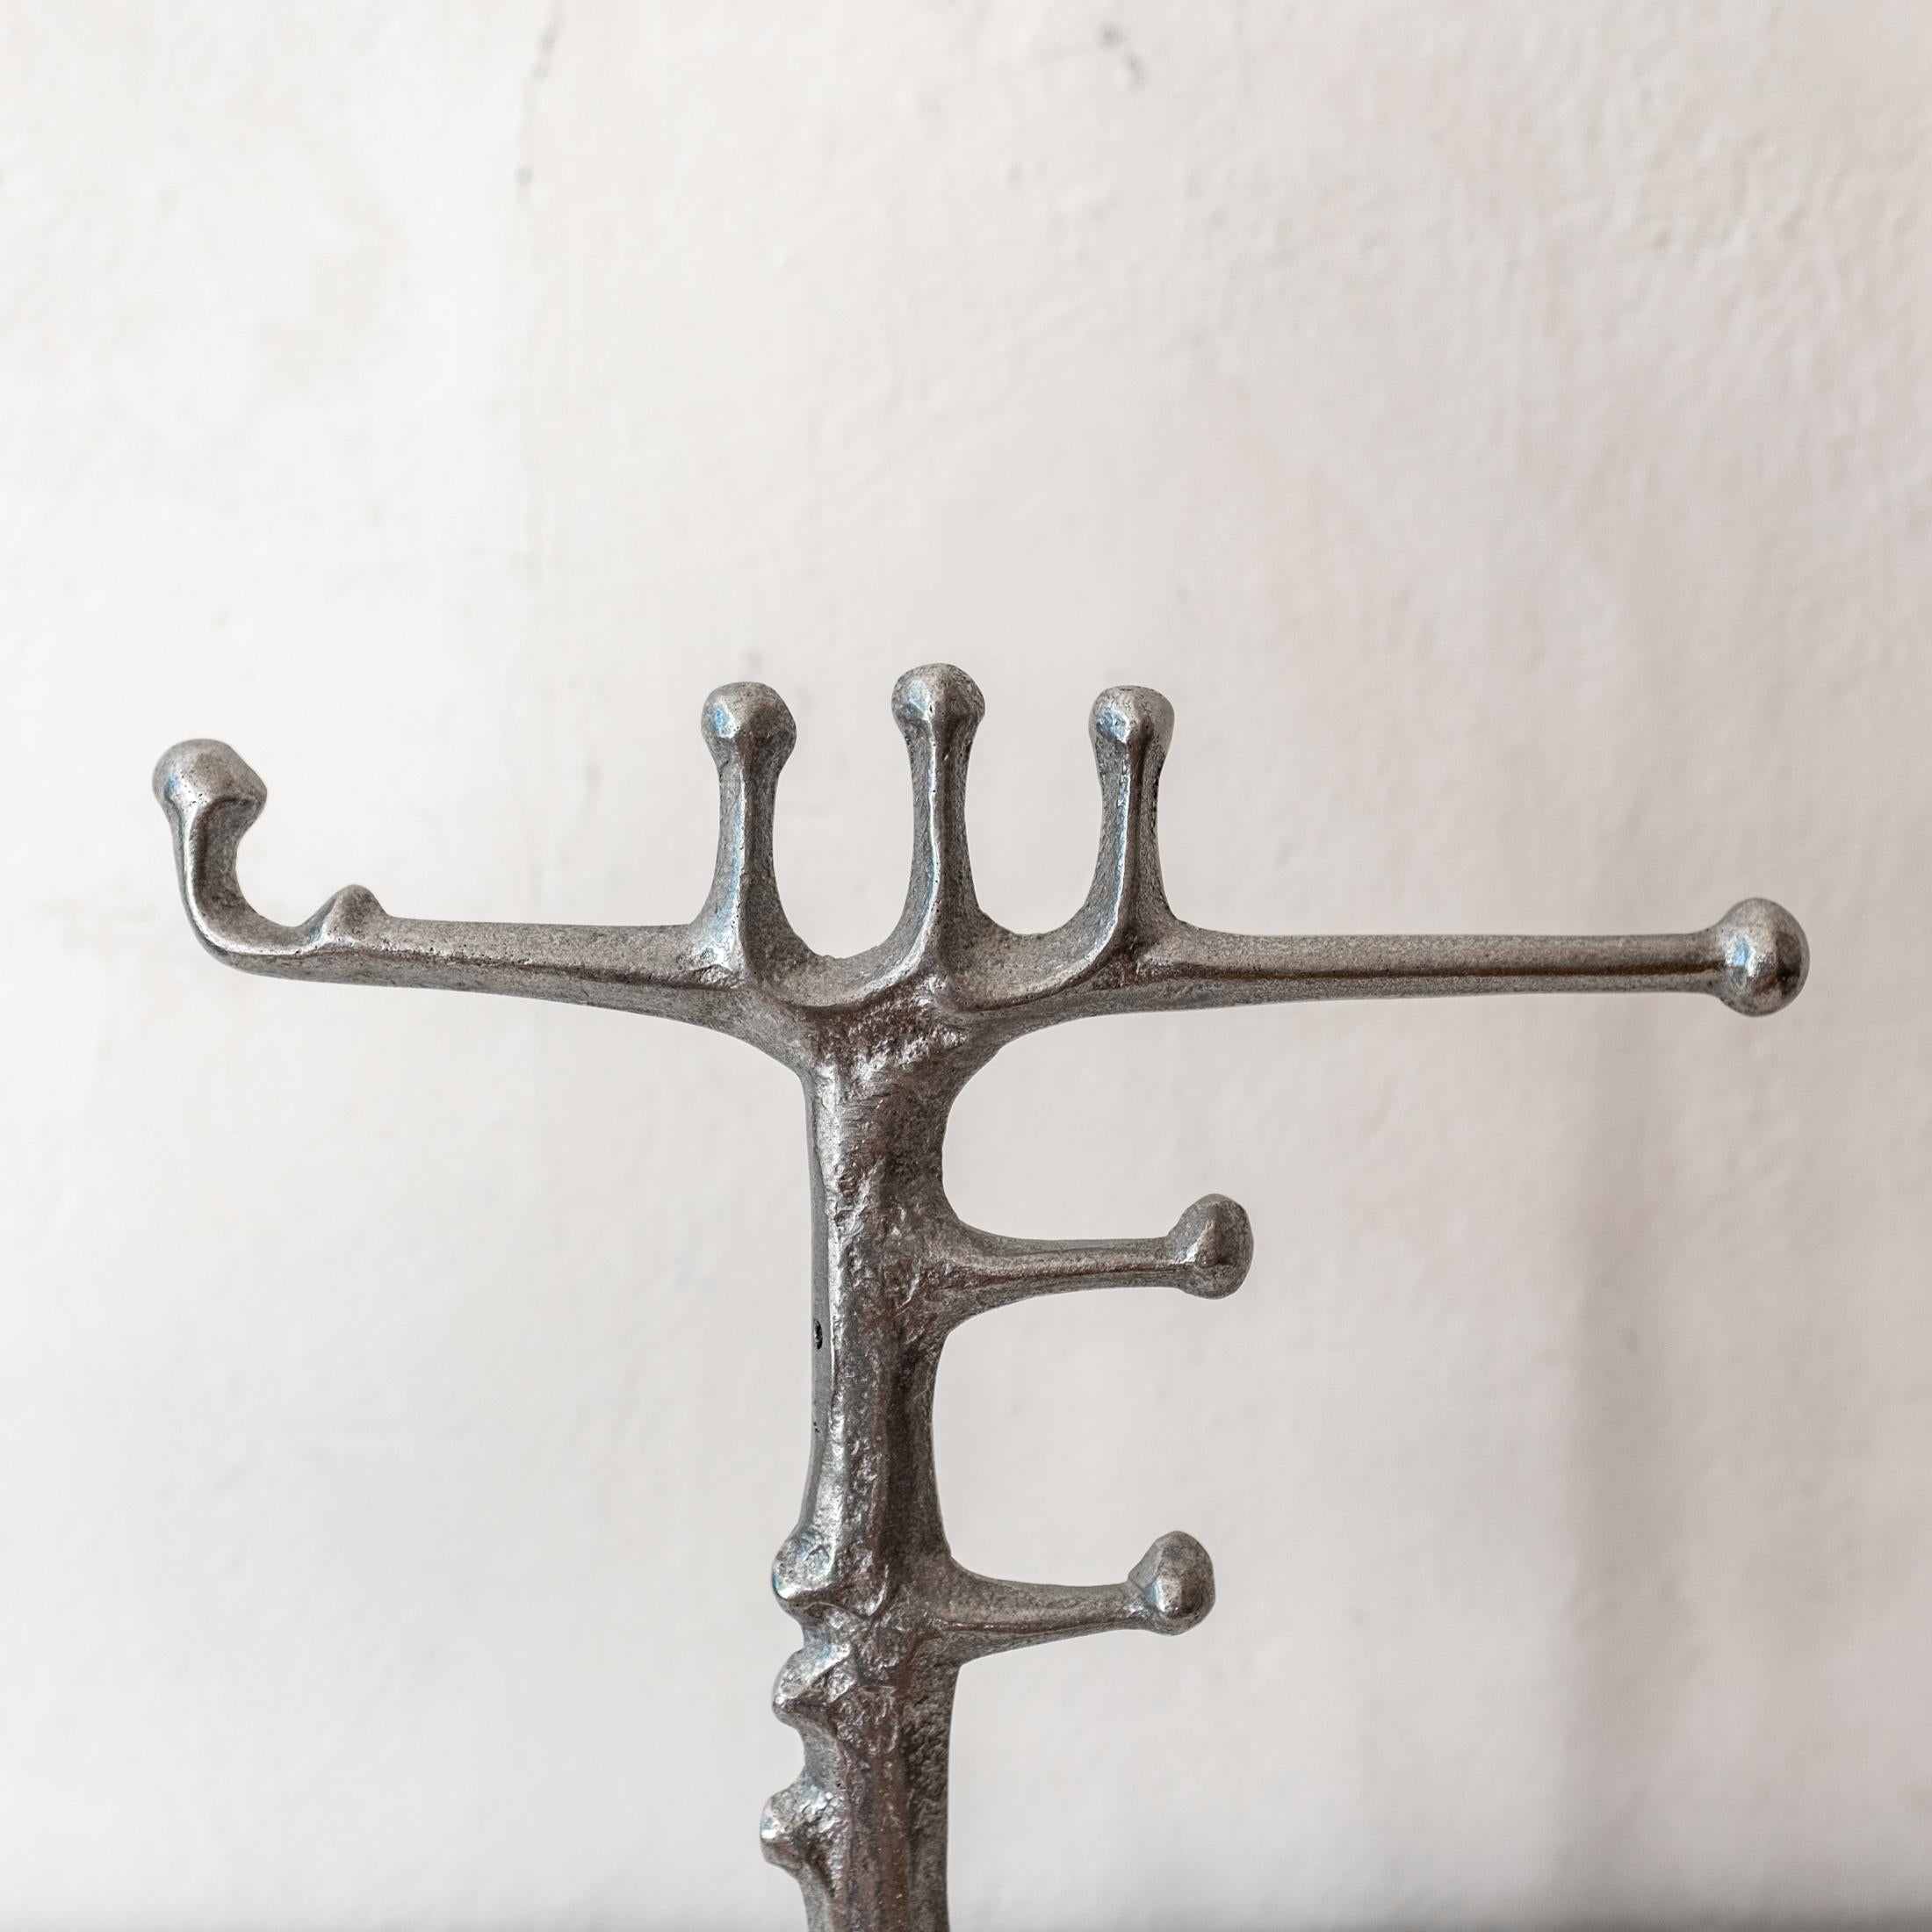 Donald Drumm Aluminum Sculpture Jewelry Stand In Good Condition For Sale In San Diego, CA